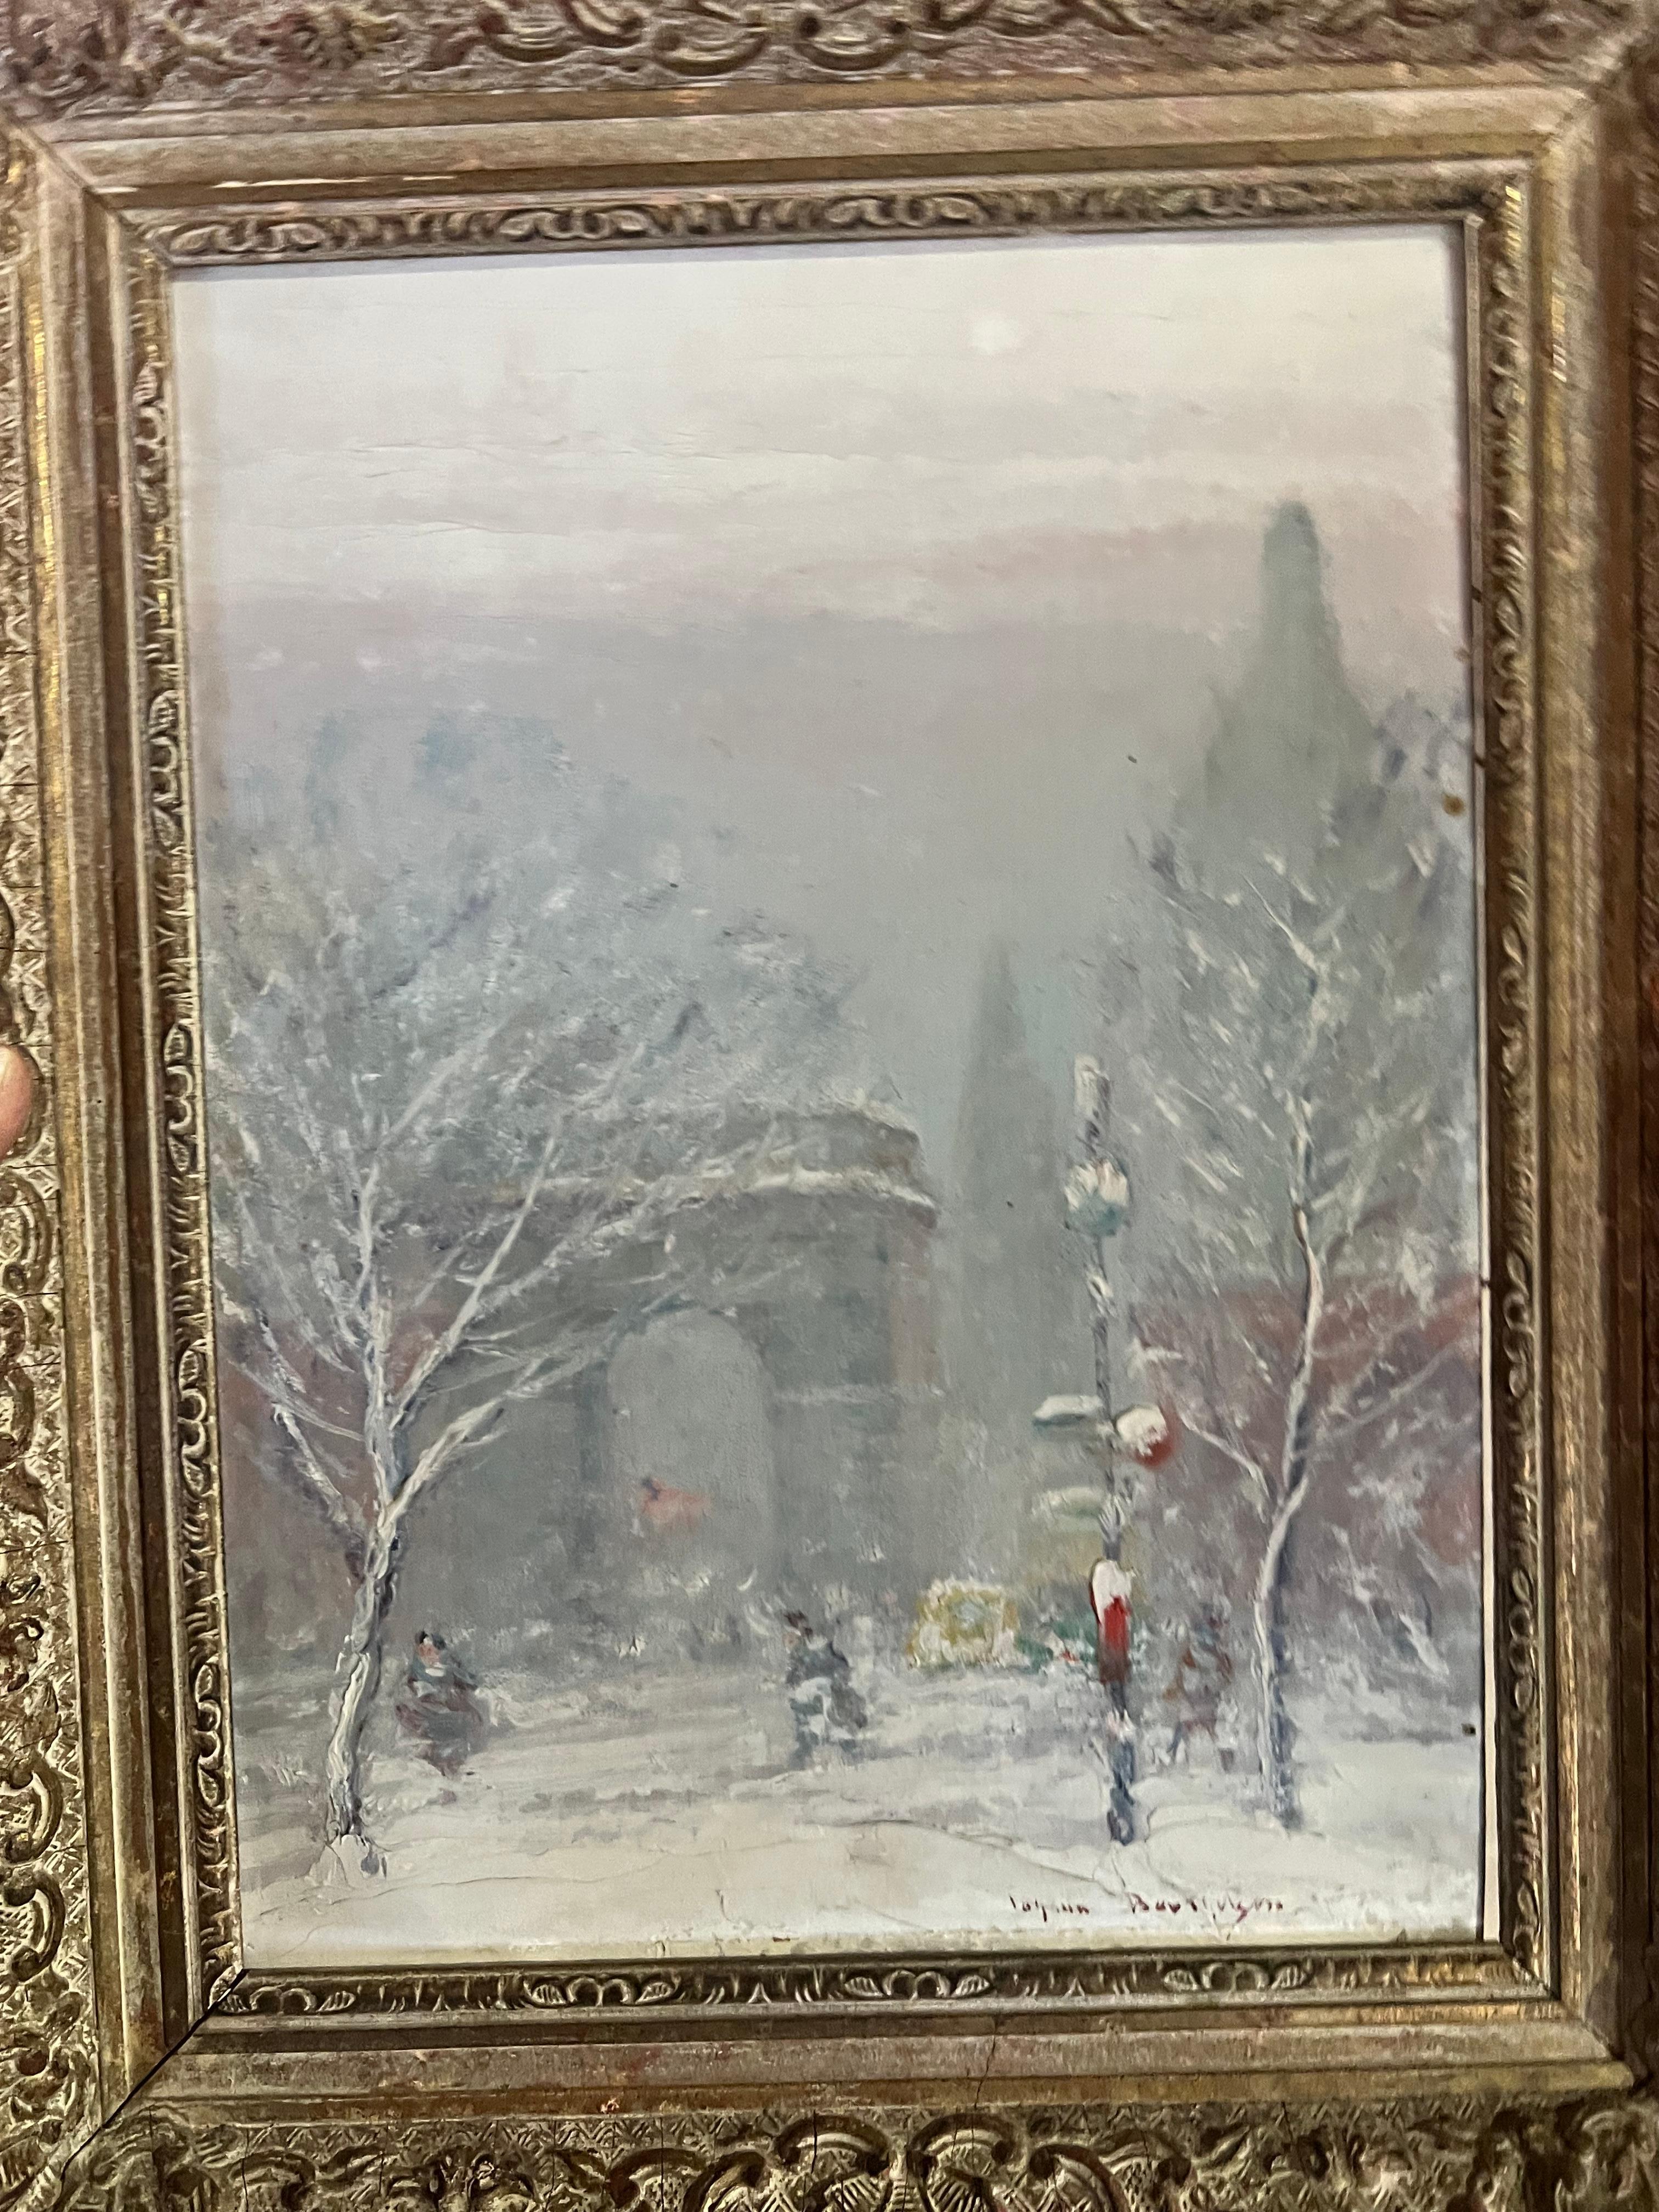 Johann Berthelsen (1883 - 1972) 
Washington Square Park, 
New York City 
Oil on Board
12 x 9 inches 
15.5x12.5 inches with frame (frame has losses)
Signed lower right: Johann Berthelsen; 
stamped on the reverse 
Original frame made by the artist's